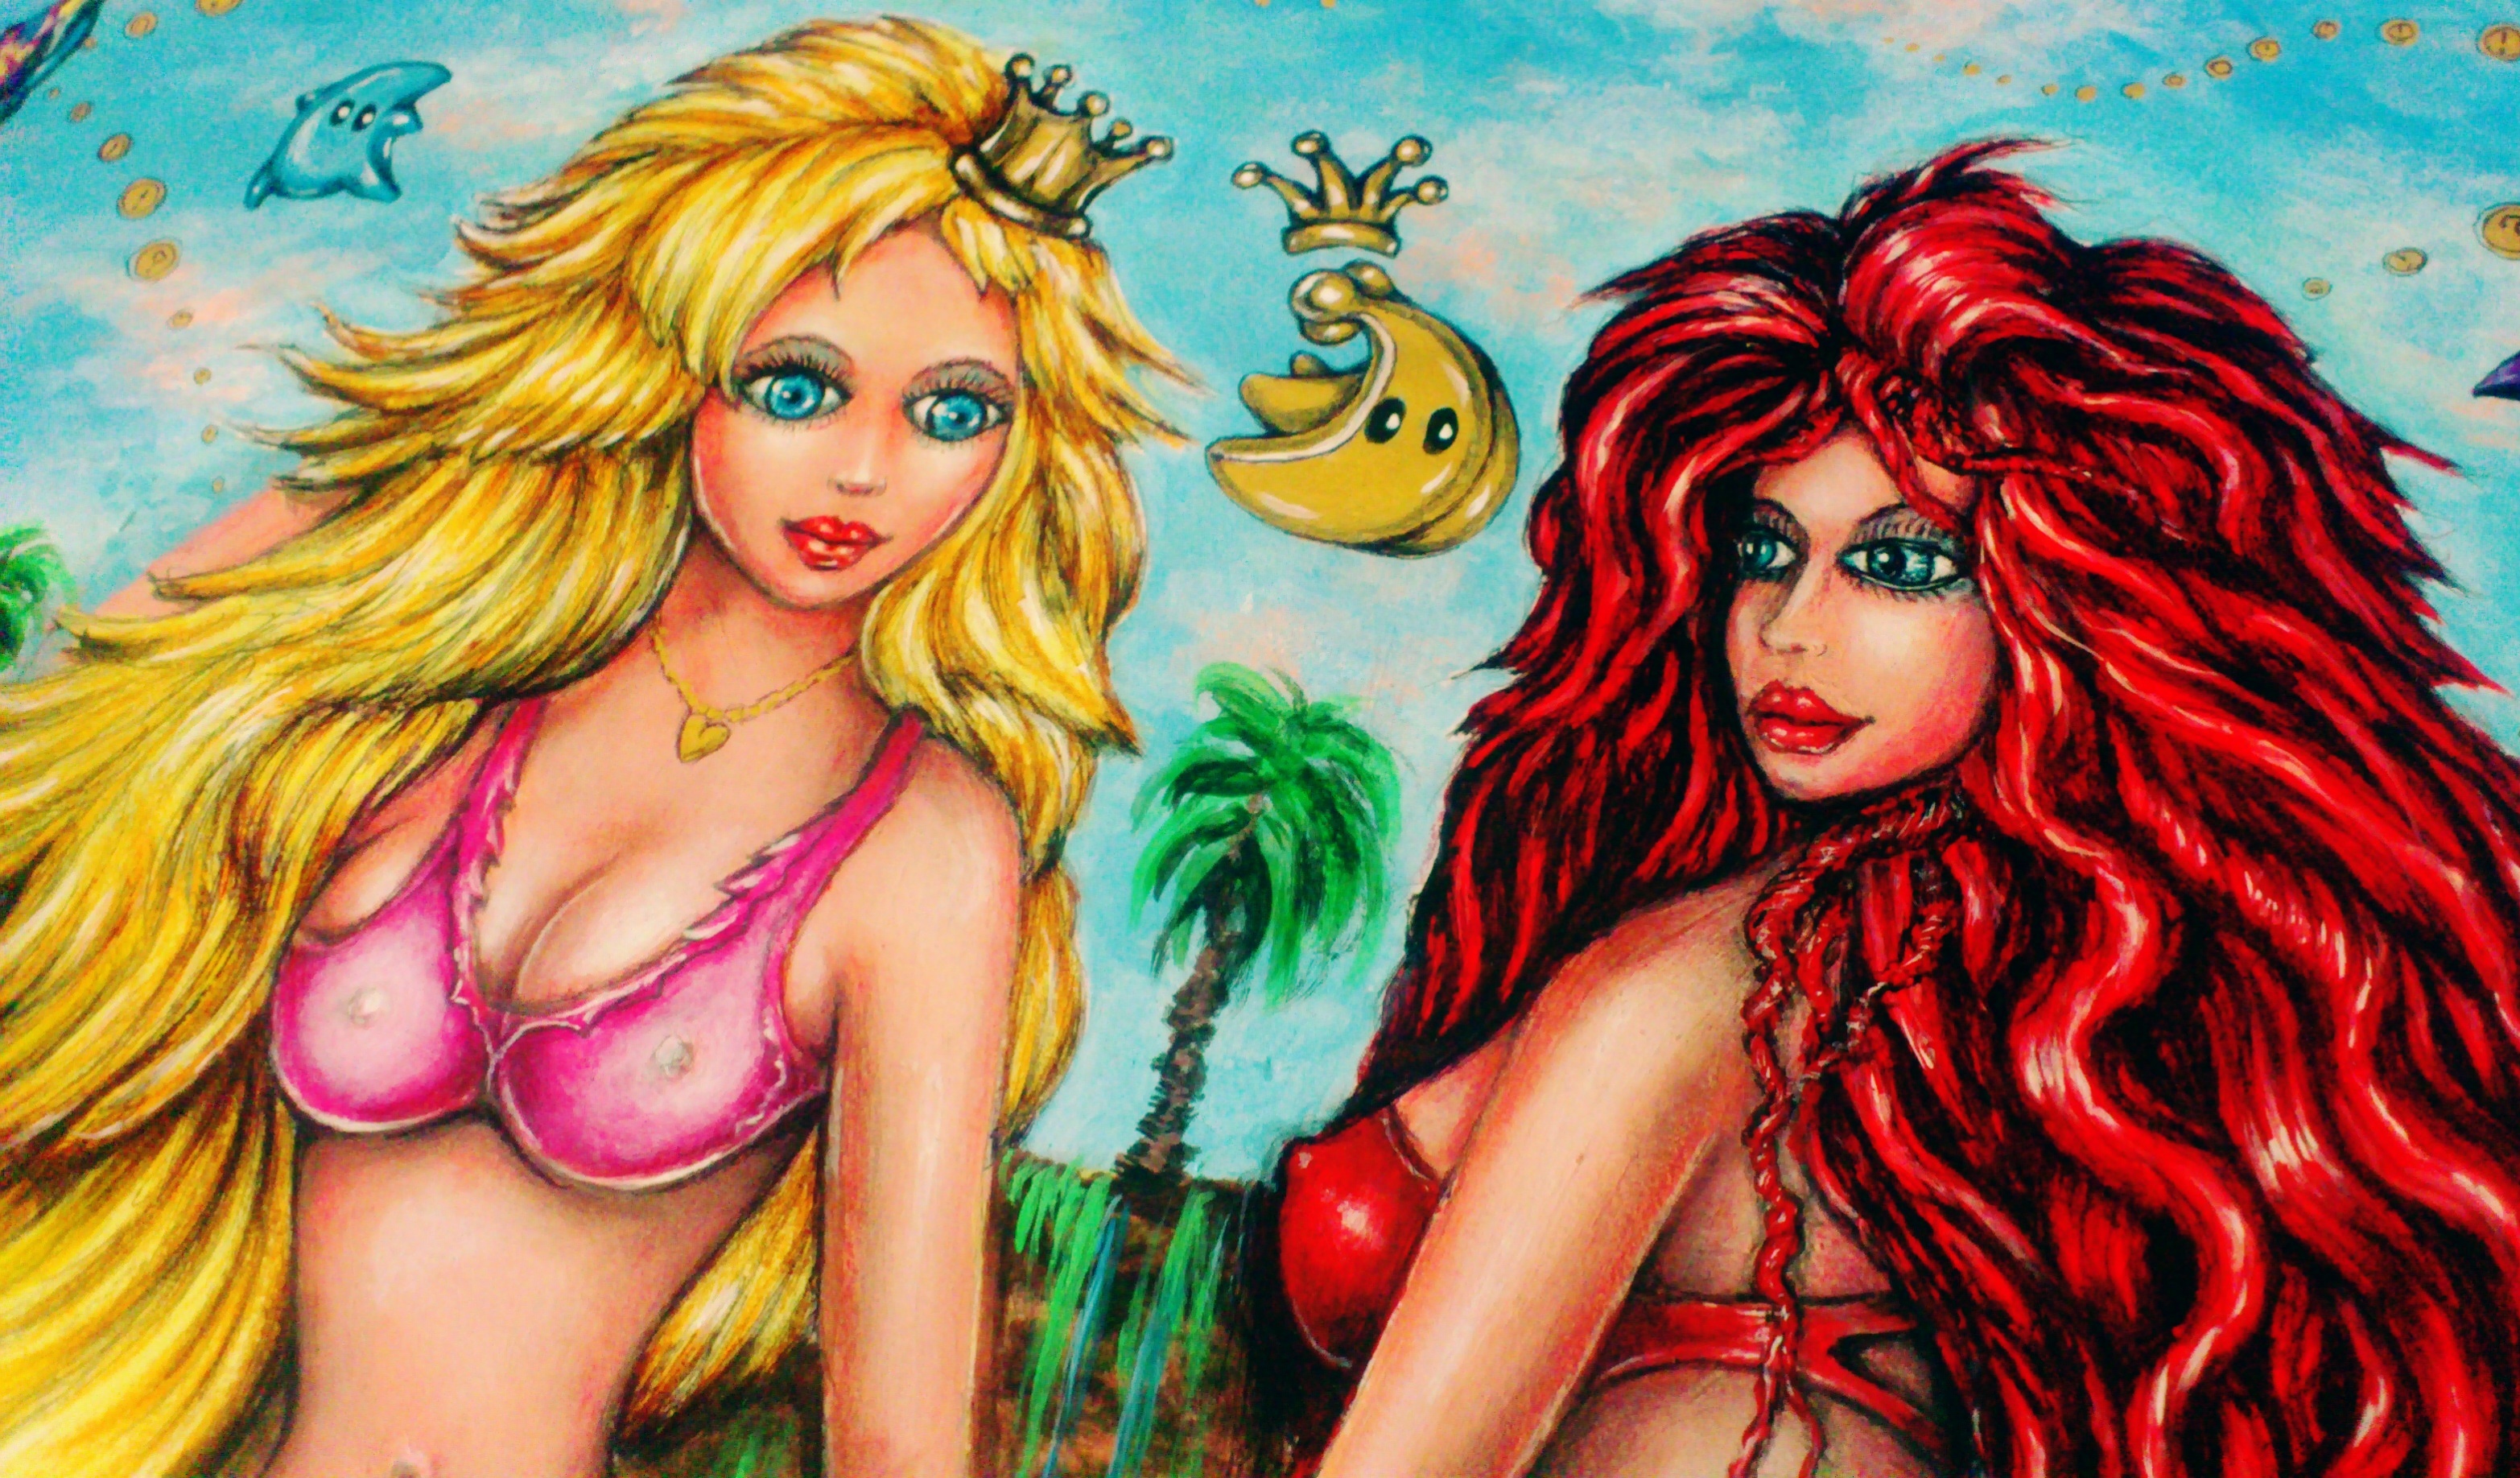 Angel Piangelo Papangelo; Princess Odyssey 2 Super Mario, 2019, Original Painting Acrylic, 65 x 48 cm. Artwork description: 241  A PRINCESS ODYSSEY 2. ft PAULINE the Mayor   Painting with Acrylic colors - a Special Method   Technique applied that makes the Painting to look like an oil Painting on Canvas, although no oils used  HOT   SEXY, JOYFUL, COLORFUL, UNIQUE ever, simply AMAZING - An UNBELIEVABLE combination of the  Super ...